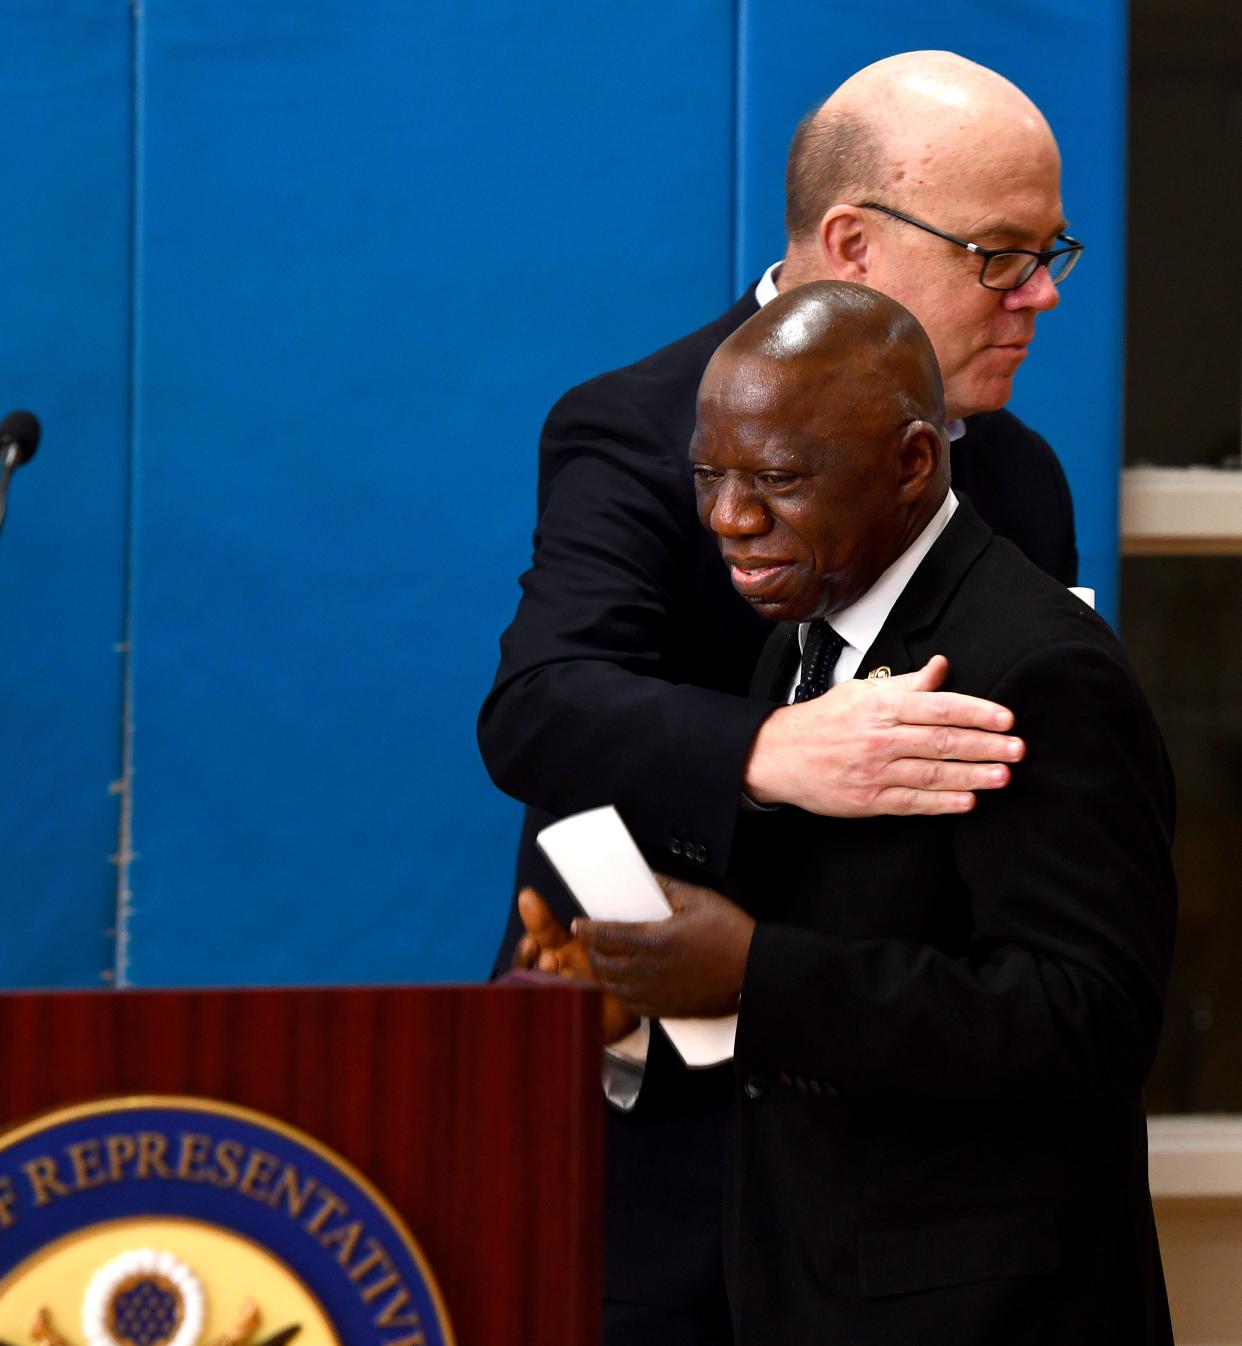 U.S. Rep. James P. McGovern and African Community Education Executive Director and Co-Founder Kaska Yawo embrace as McGovern announces Friday that ACE will receive $3 million in federal funding for the new immigrant and refugee services facility on Gage Street in Worcester.